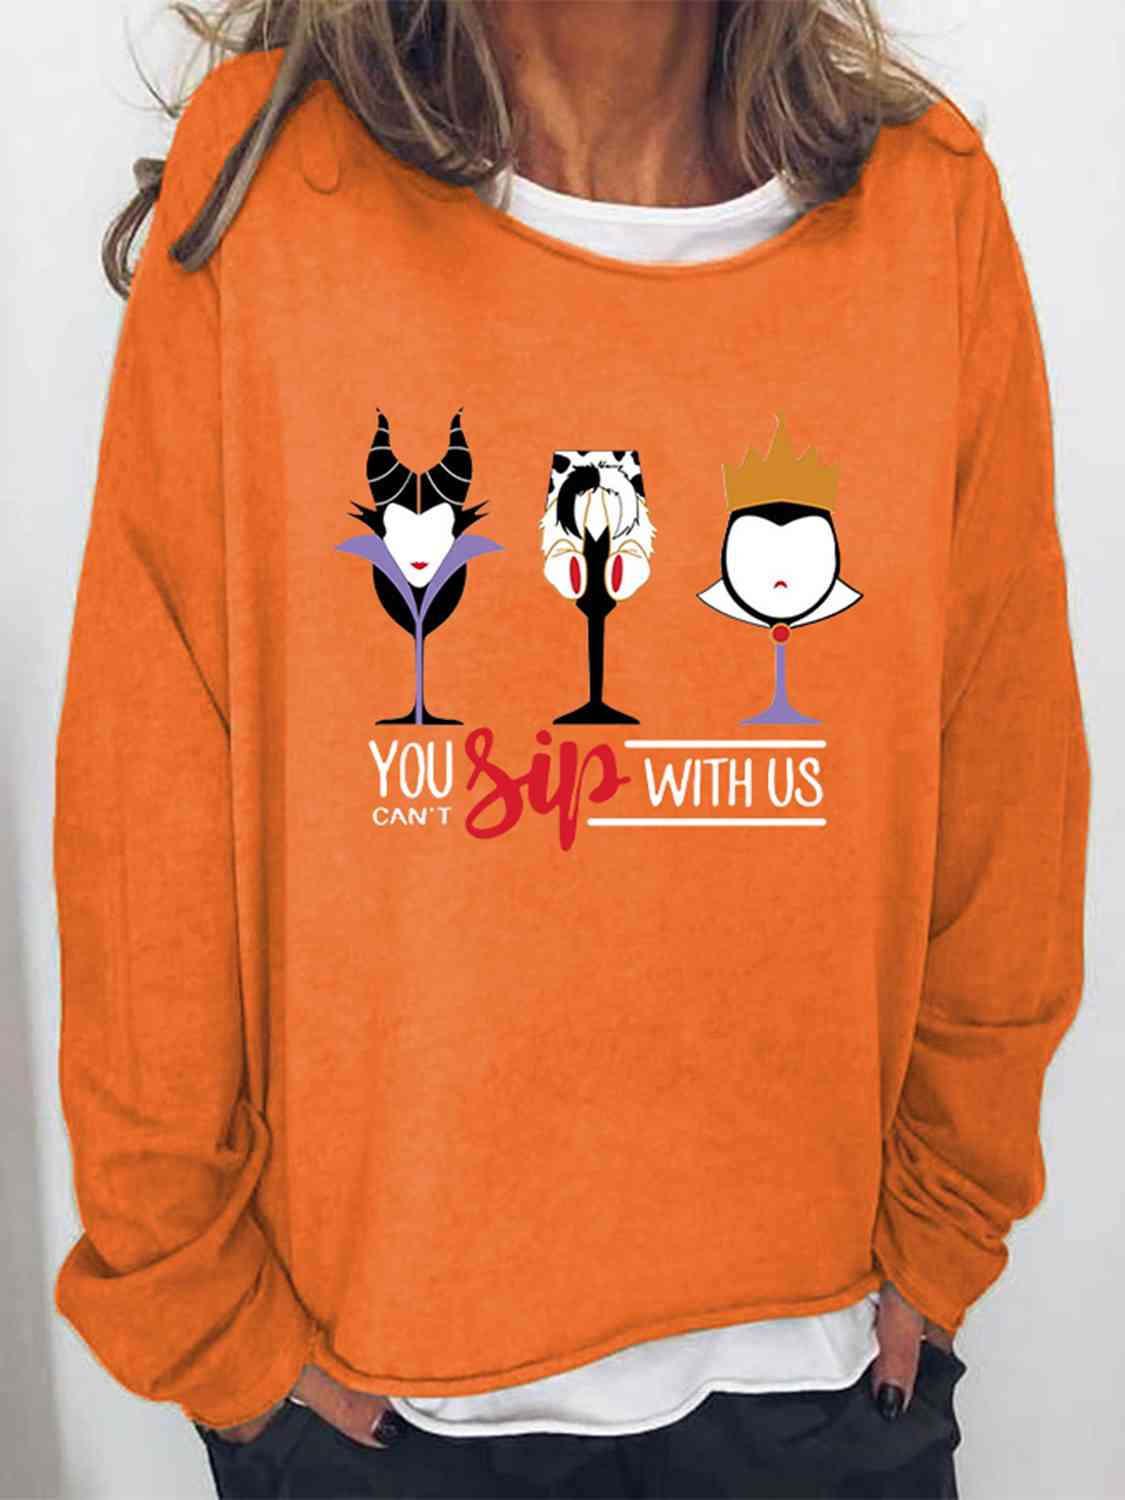 Full Size YOU CAN'T SIP WITH US Graphic Sweatshirt, MyriadMart